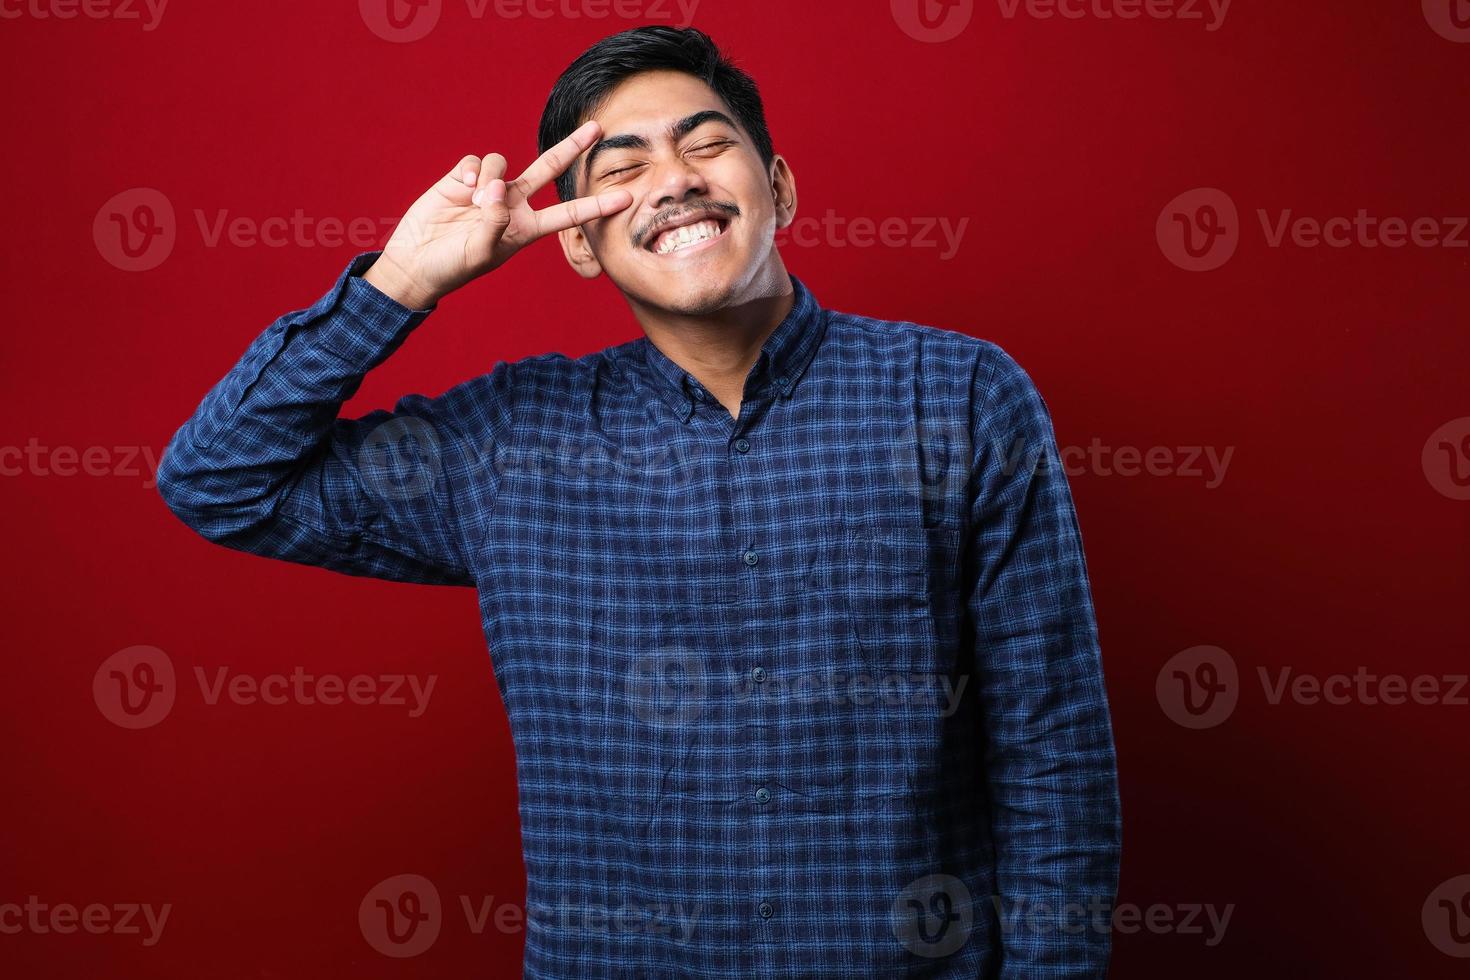 Young handsome asian man wearing casual shirt doing peace symbol with fingers over face, smiling cheerful showing victory photo